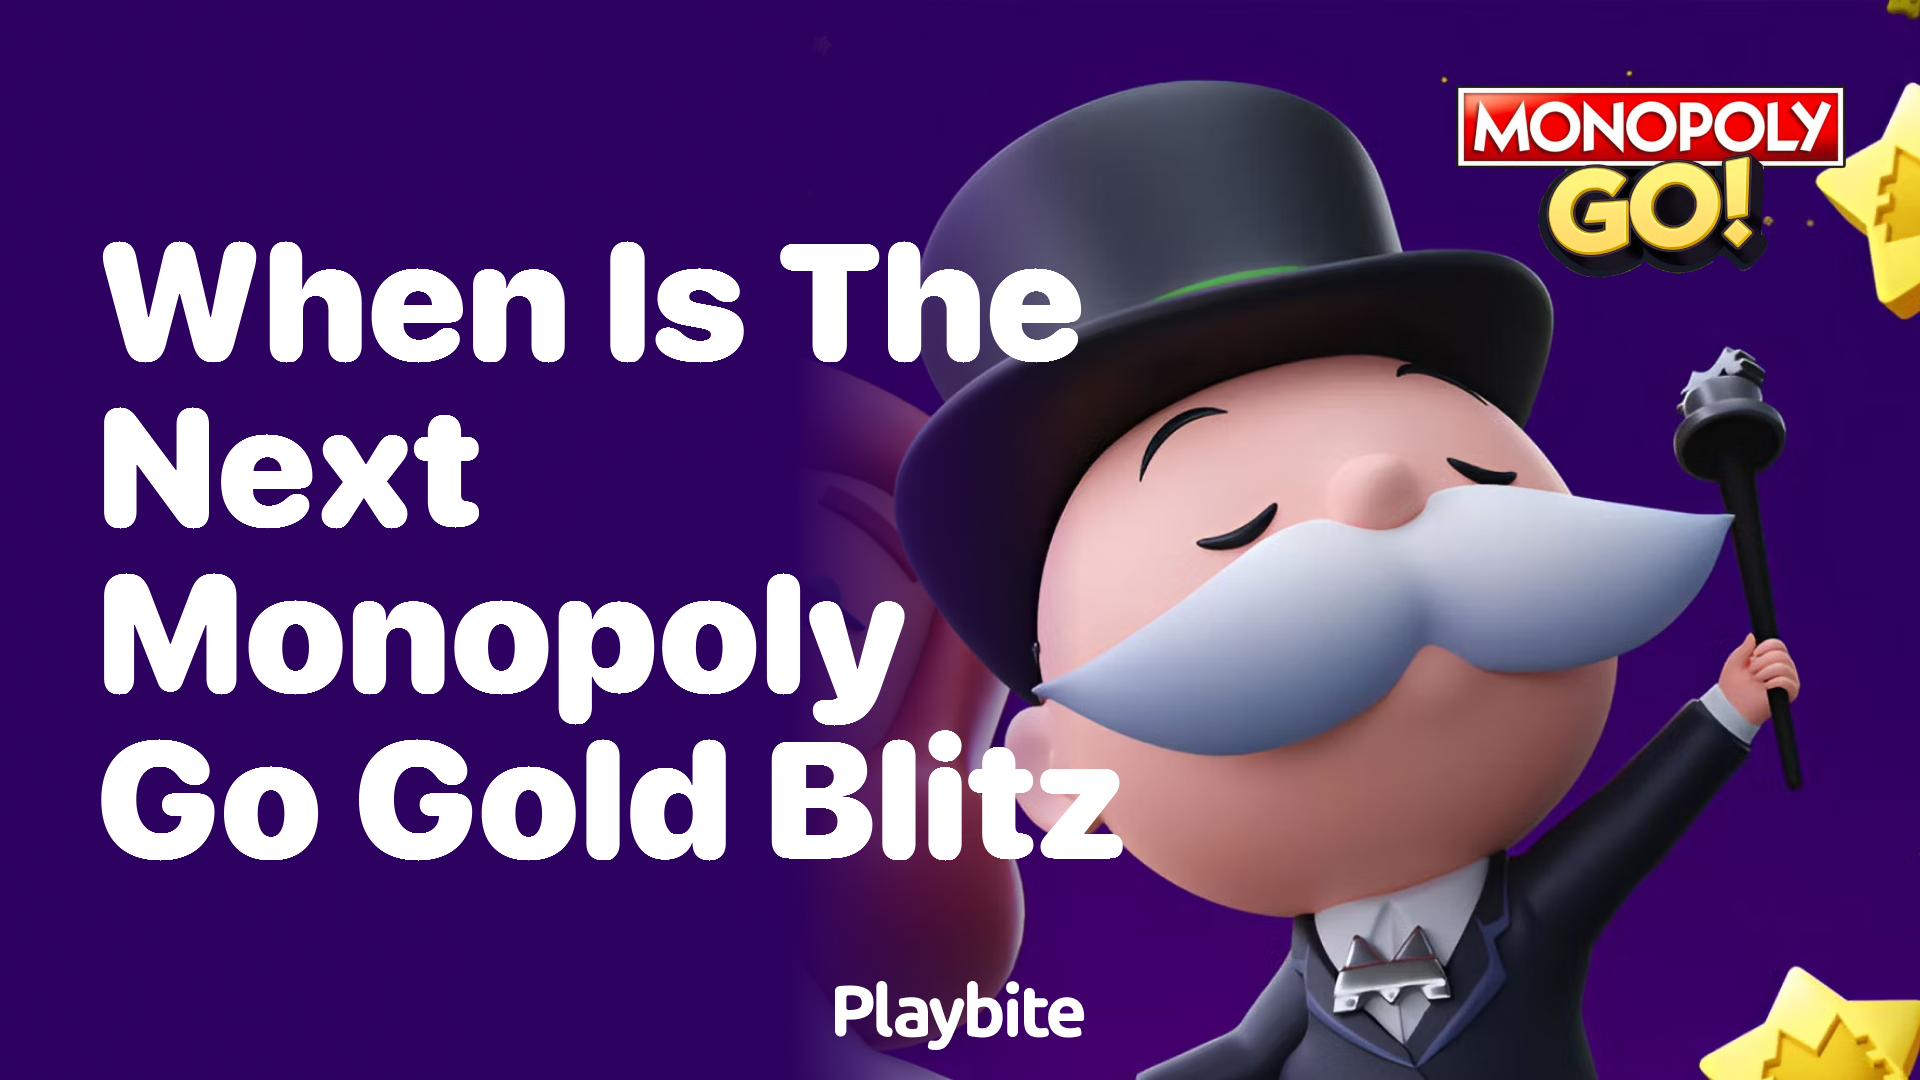 When Is the Next Monopoly Go Gold Blitz?